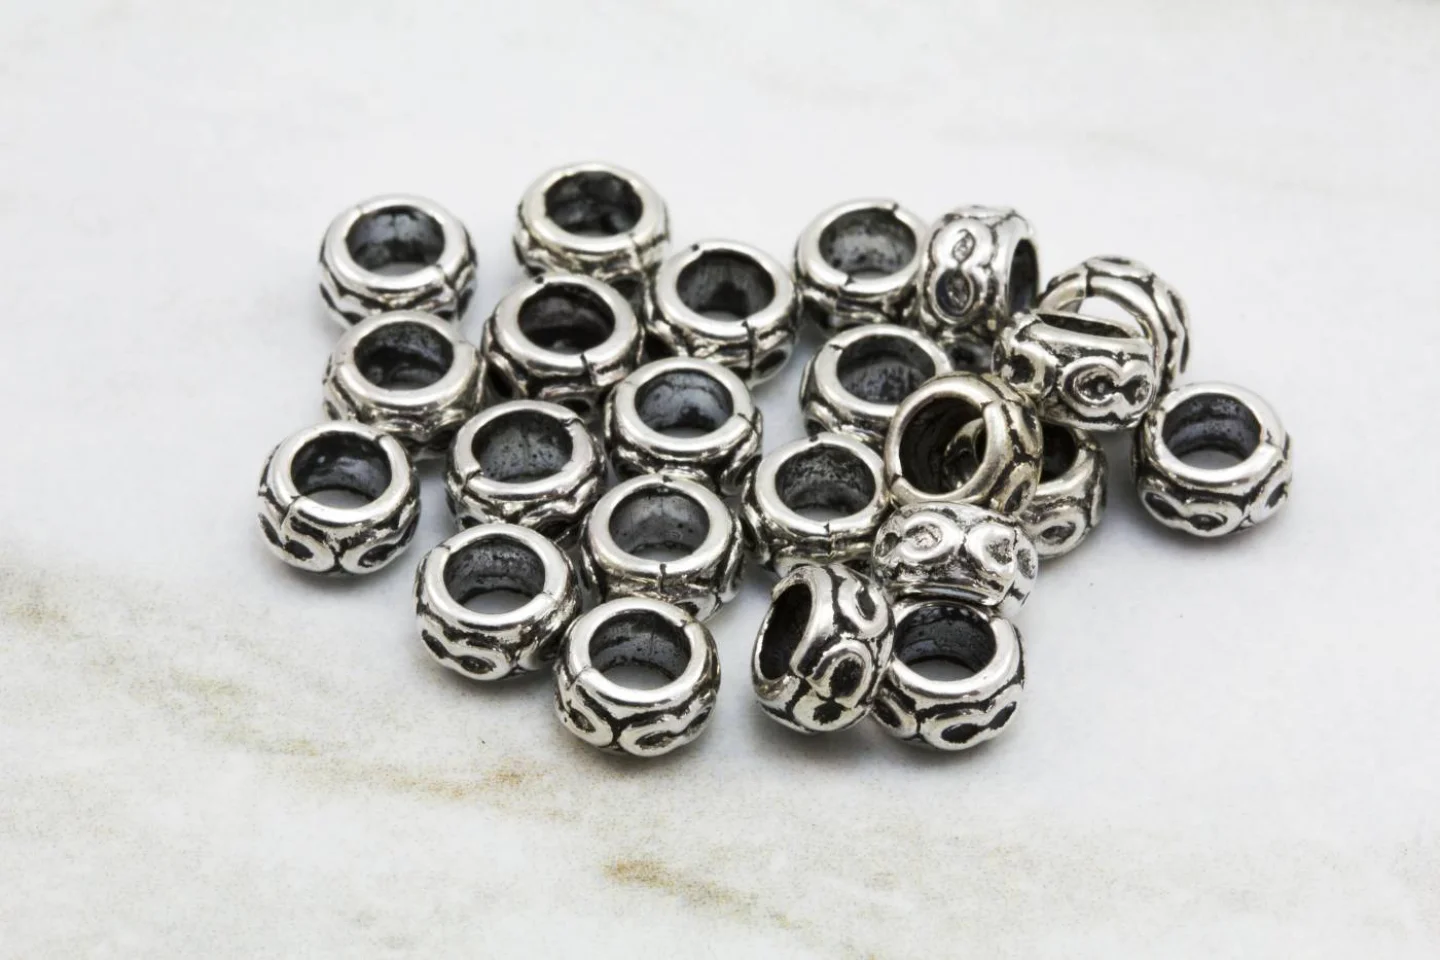 6mm-metal-silver-round-jewelry-spacers.